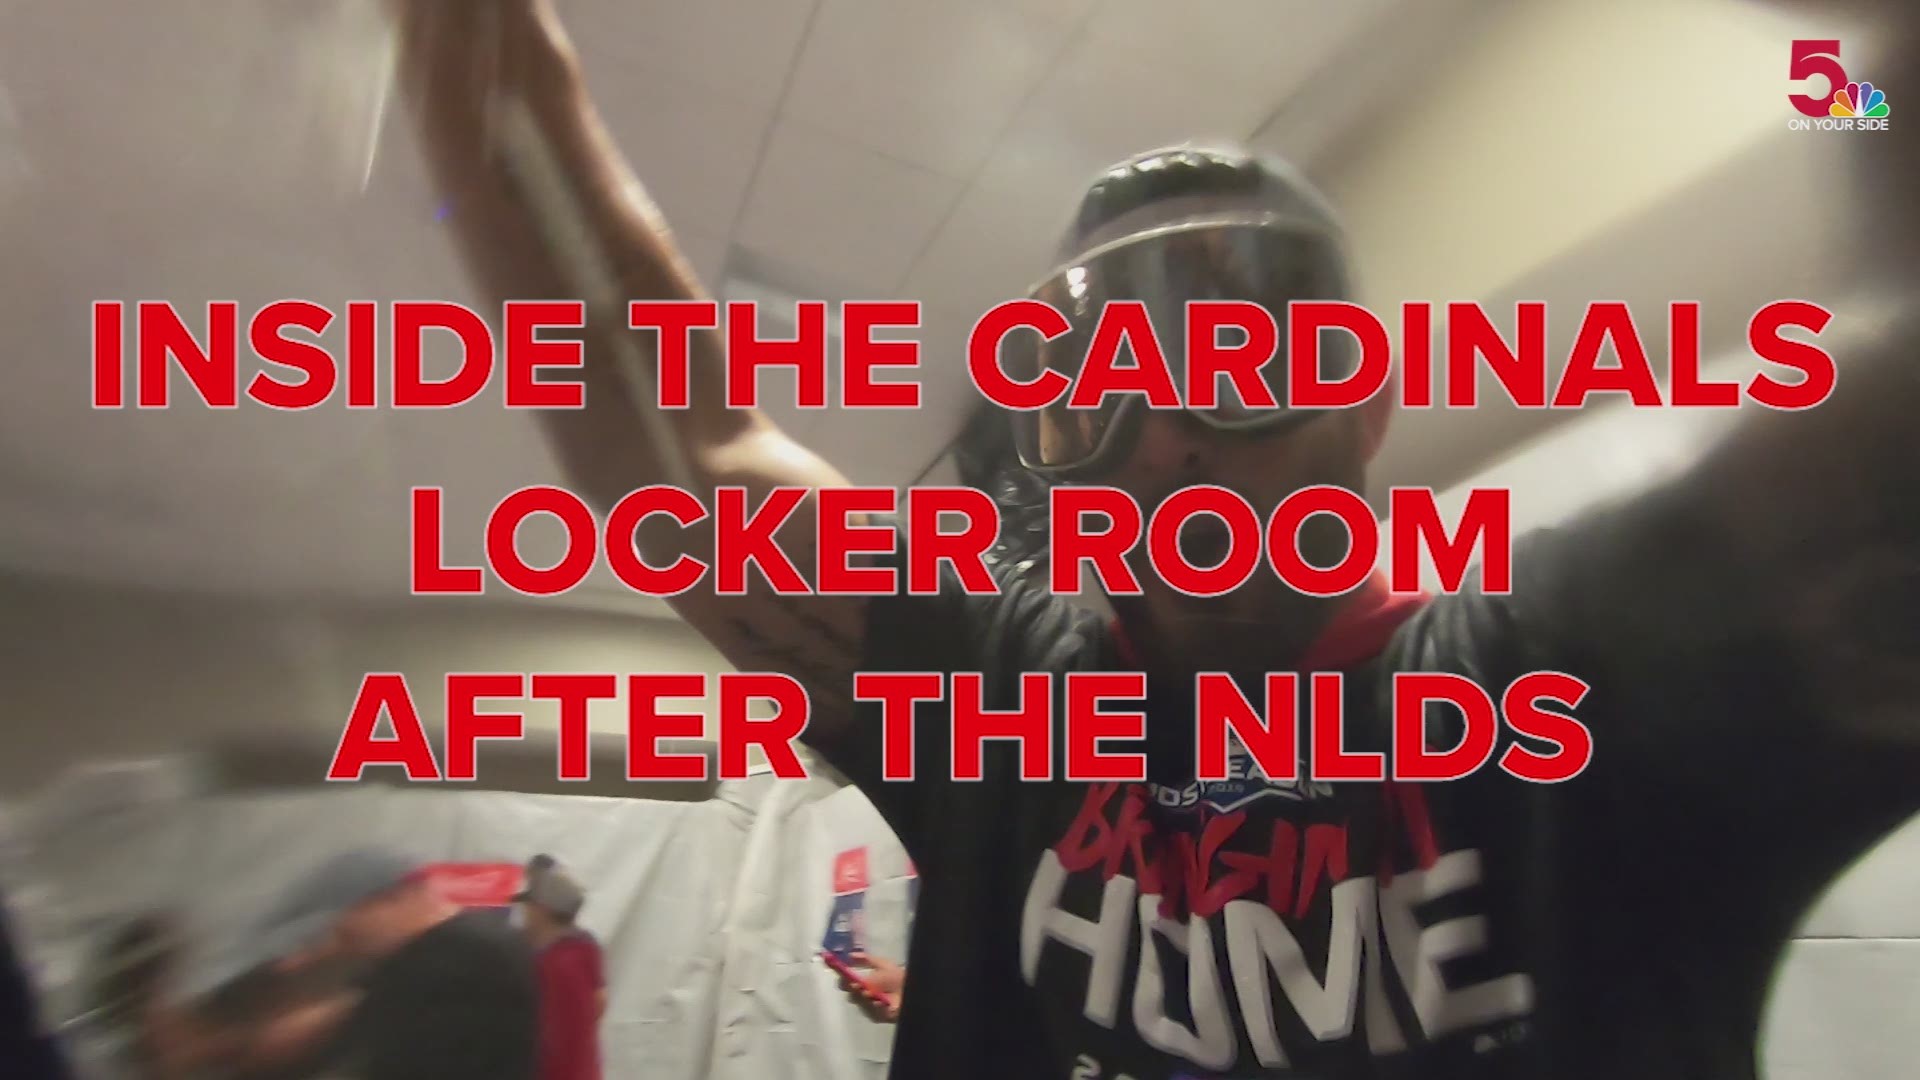 We took a GoPro inside the Cardinals locker room after the NLDS... and let it roll. Here's the best of what we got.